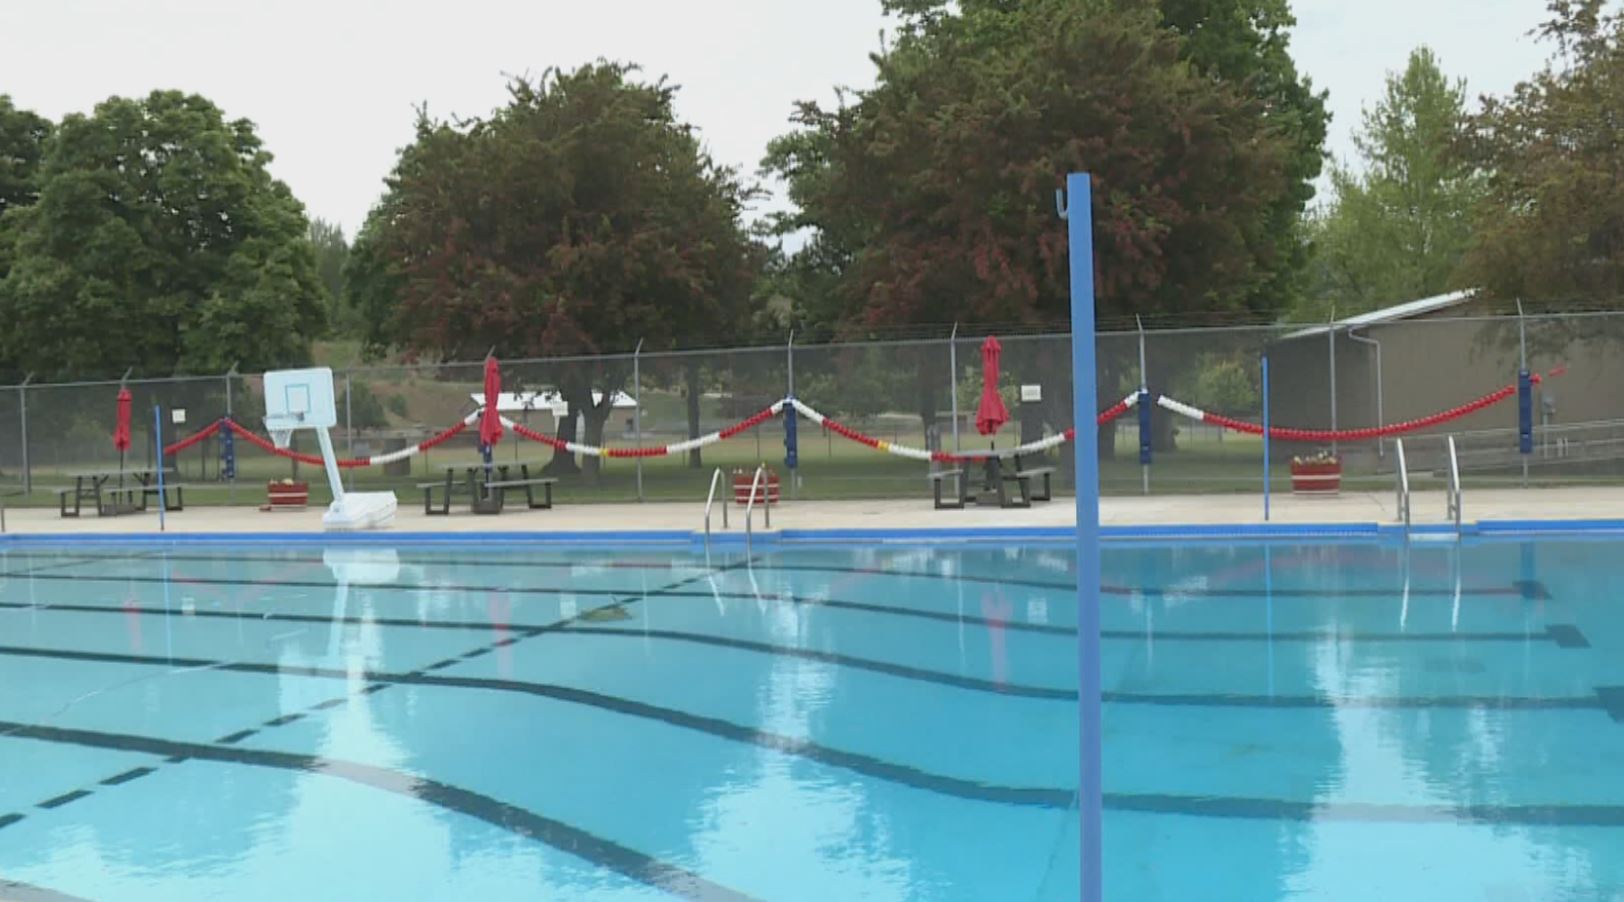 Oliver outdoor pool to open after large water leak repaired